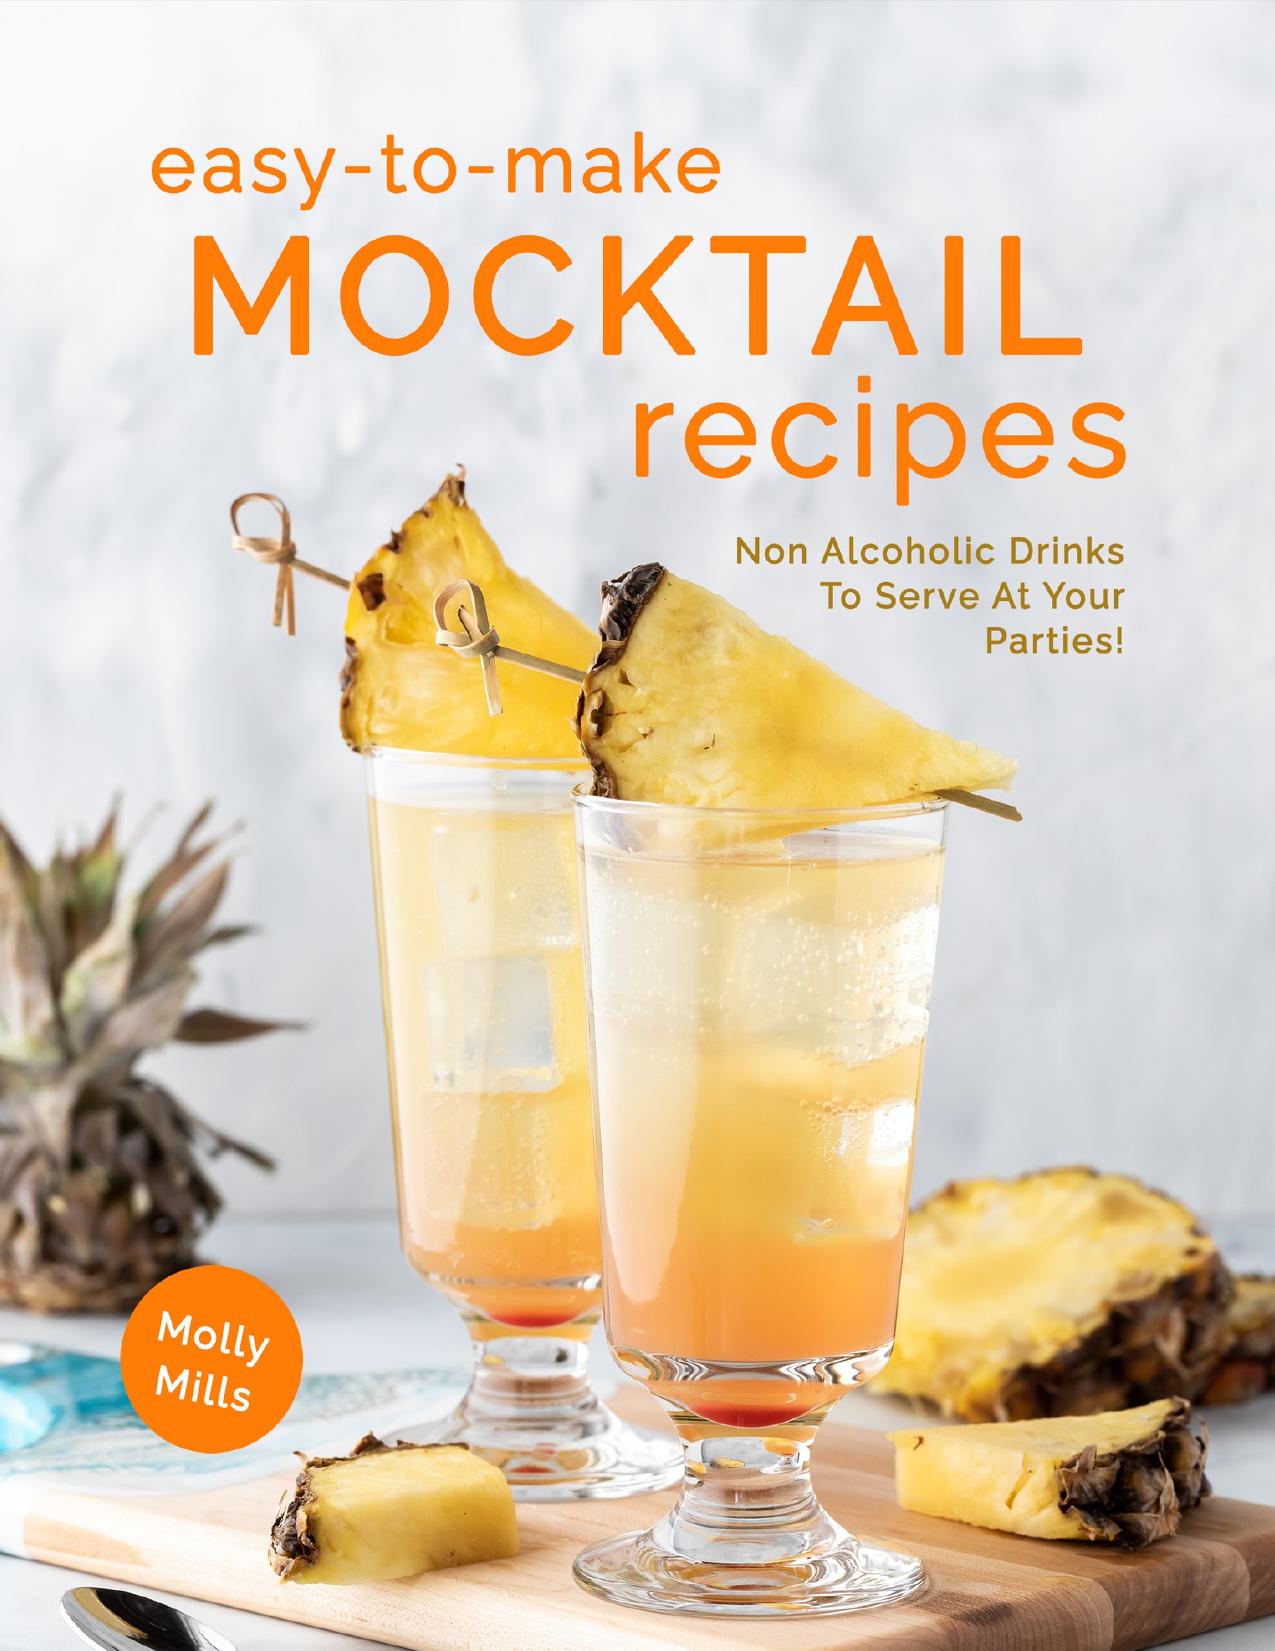 Easy-To-Make Mocktail Recipes: Non Alcoholic Drinks To Serve At Your Parties! by Mills Molly